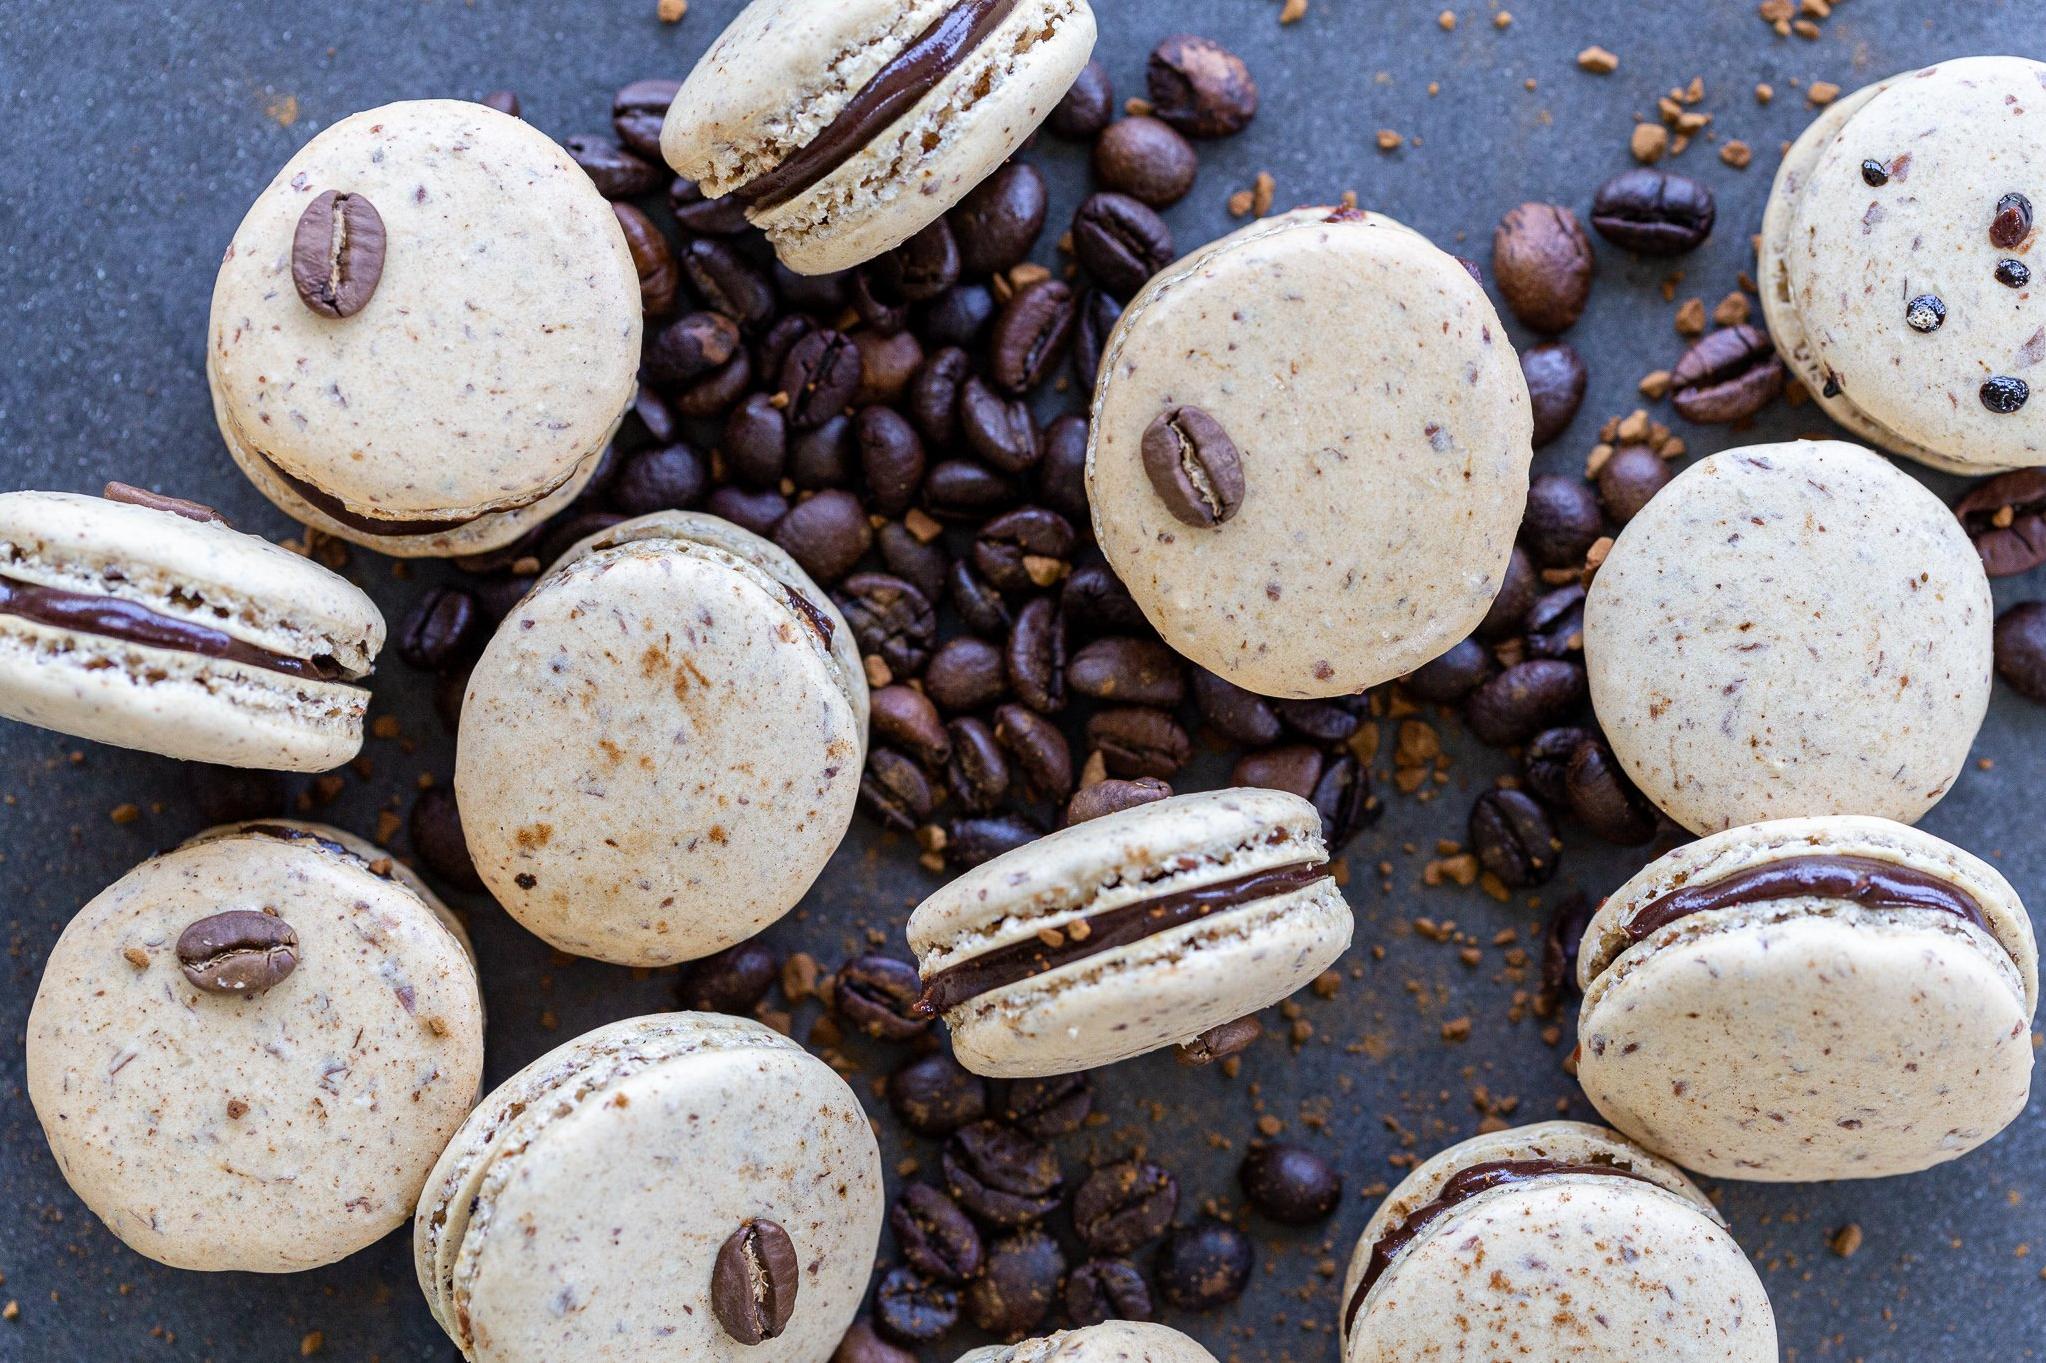  With only six ingredients, these macaroons are a delightfully simple dessert option.